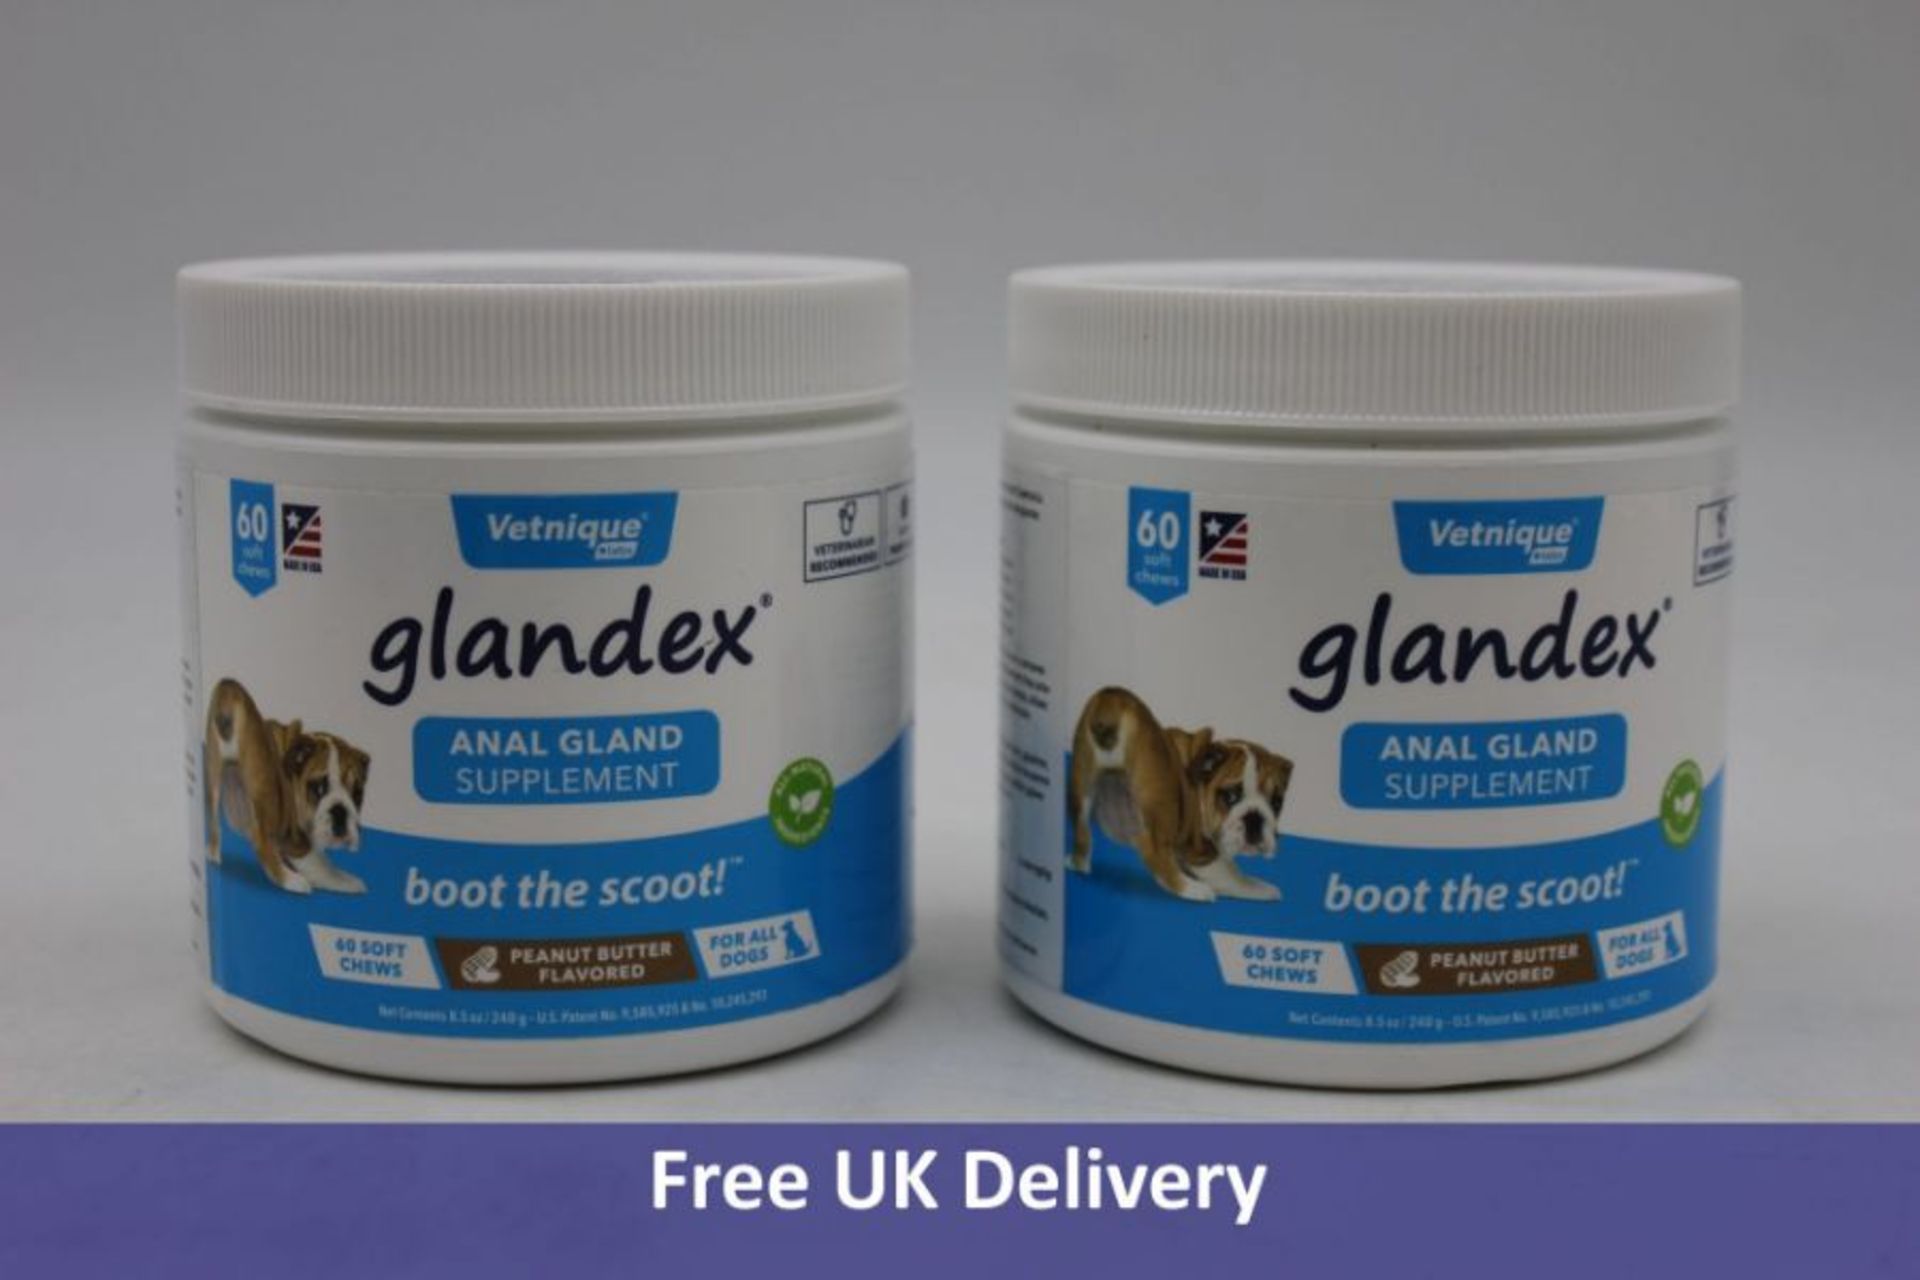 Eight Tubs of Vetnique Glandex Anal Gland Supplement, 60 Soft Chews Per Tub, Peanut Butter Flavoured